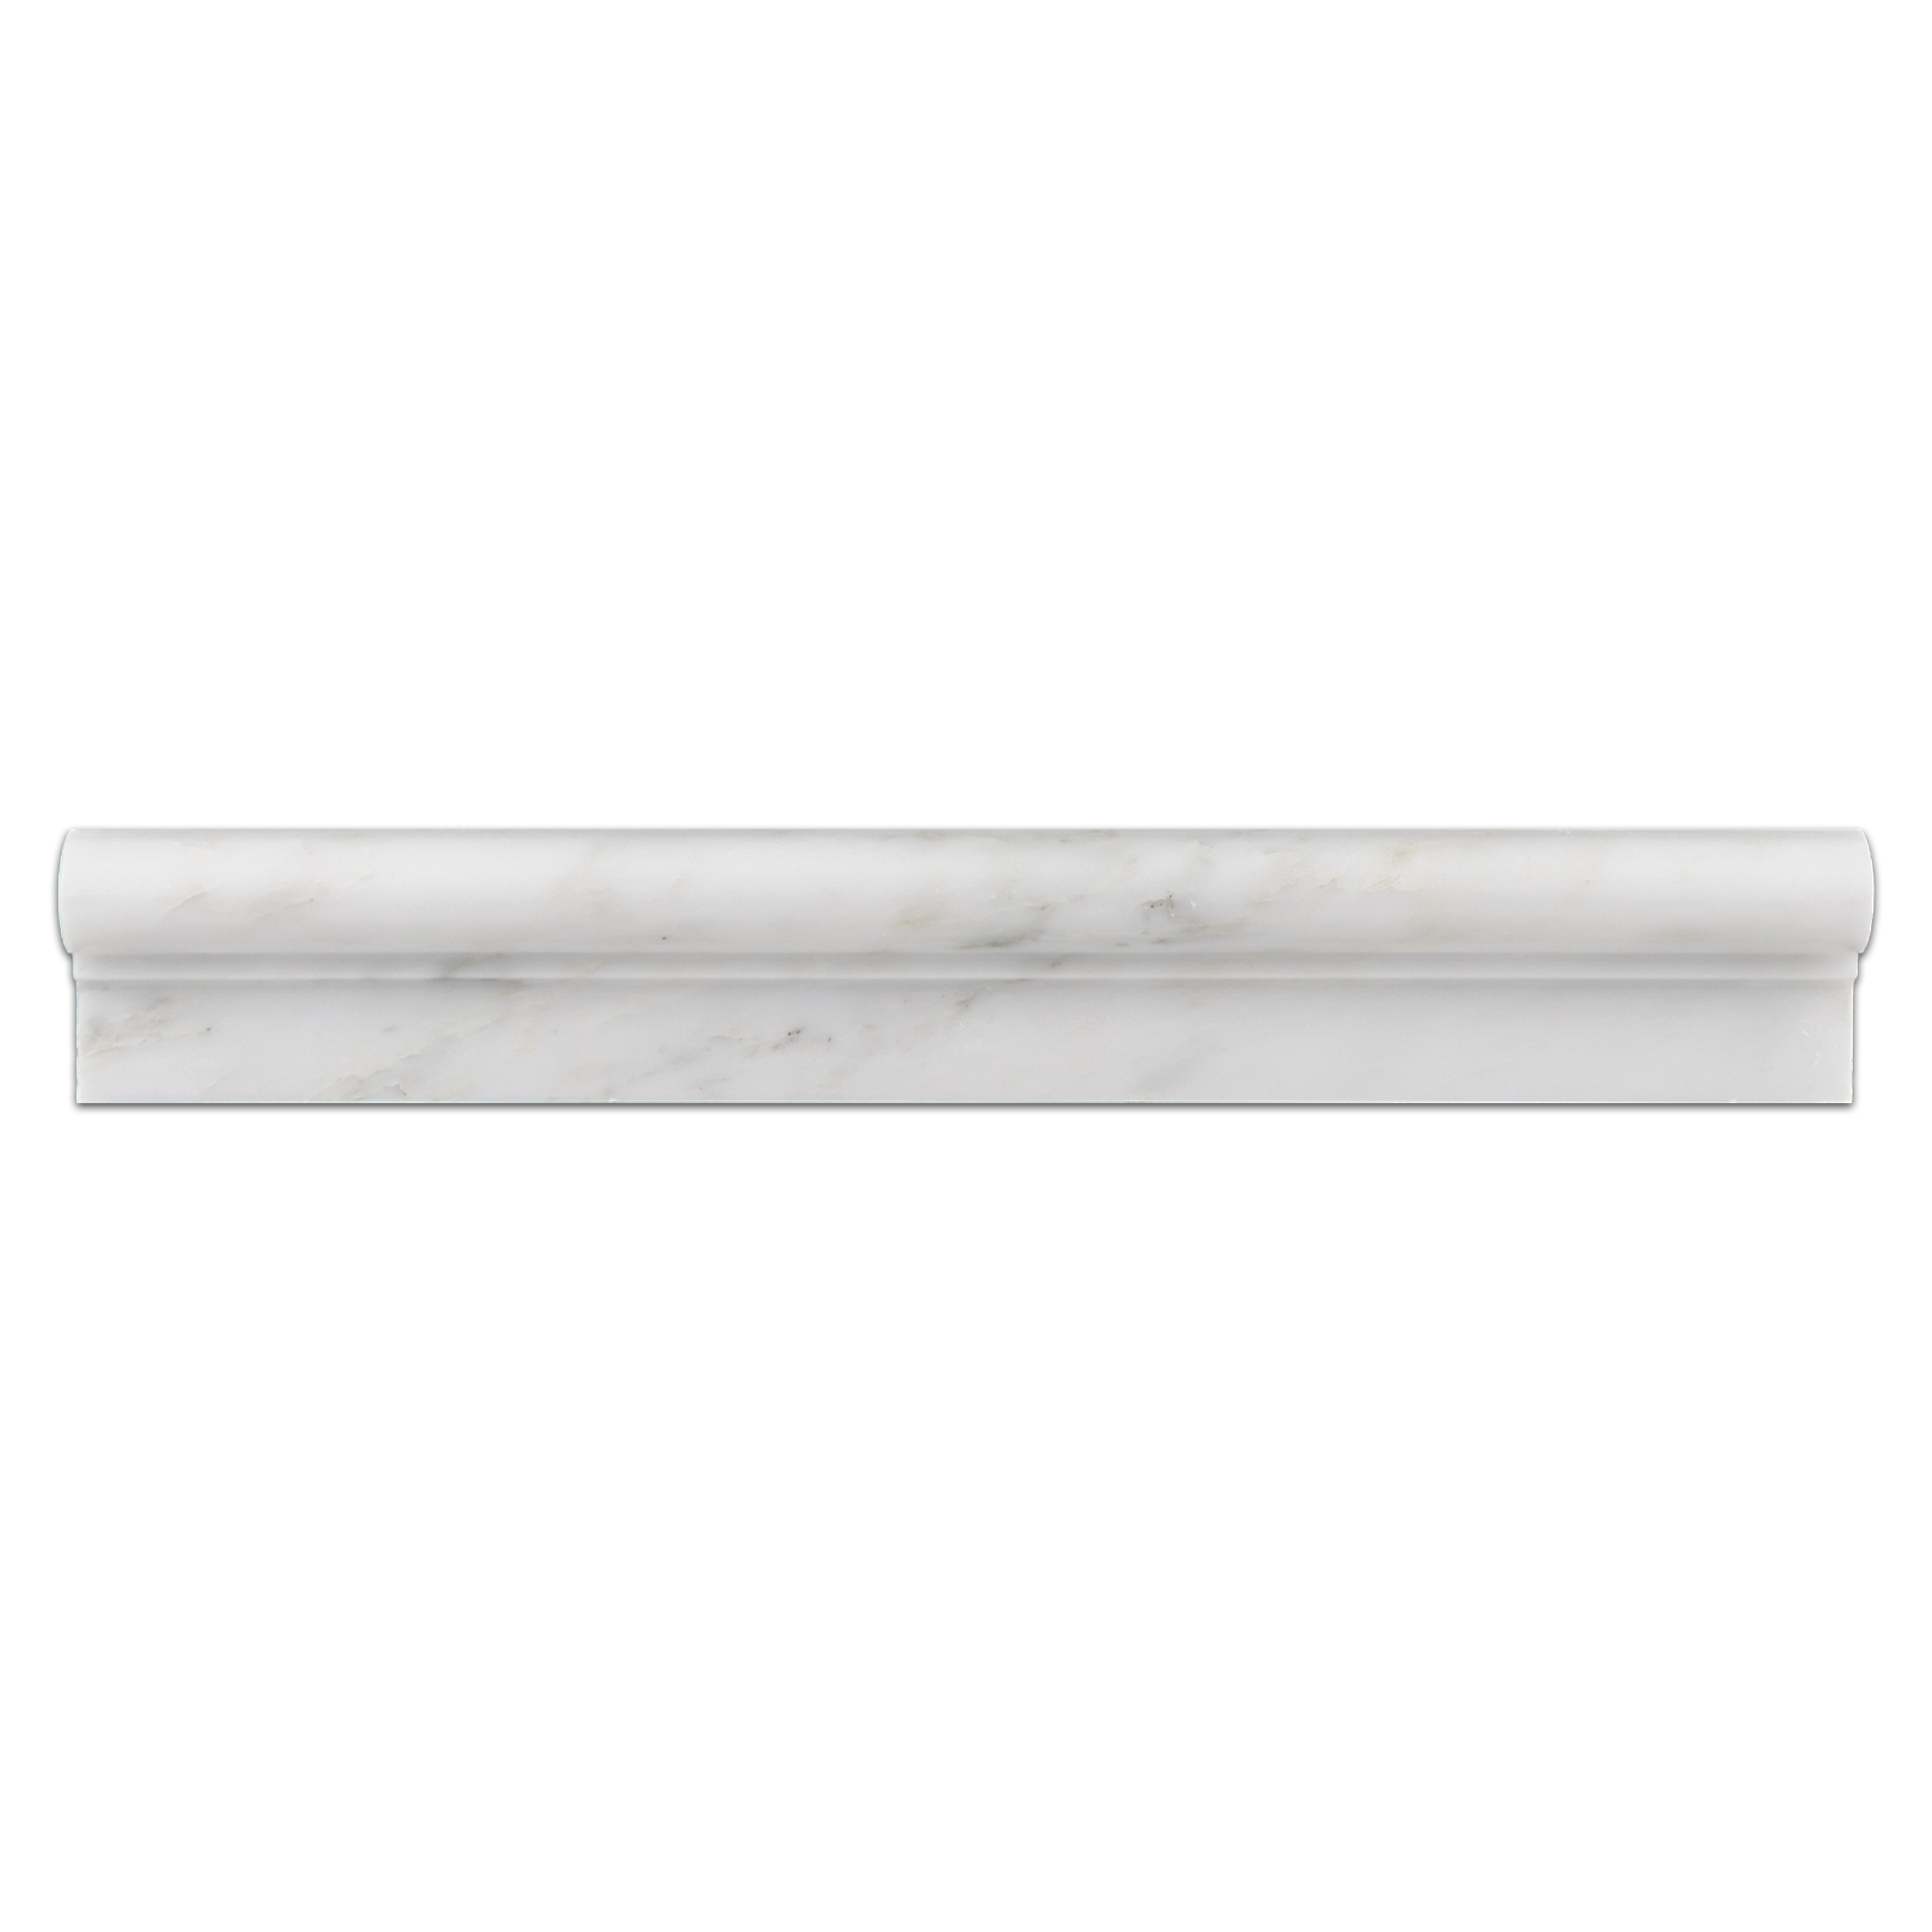 Elon Pearl White Marble Ogee 2x12 Polished Tile - Surface Group International